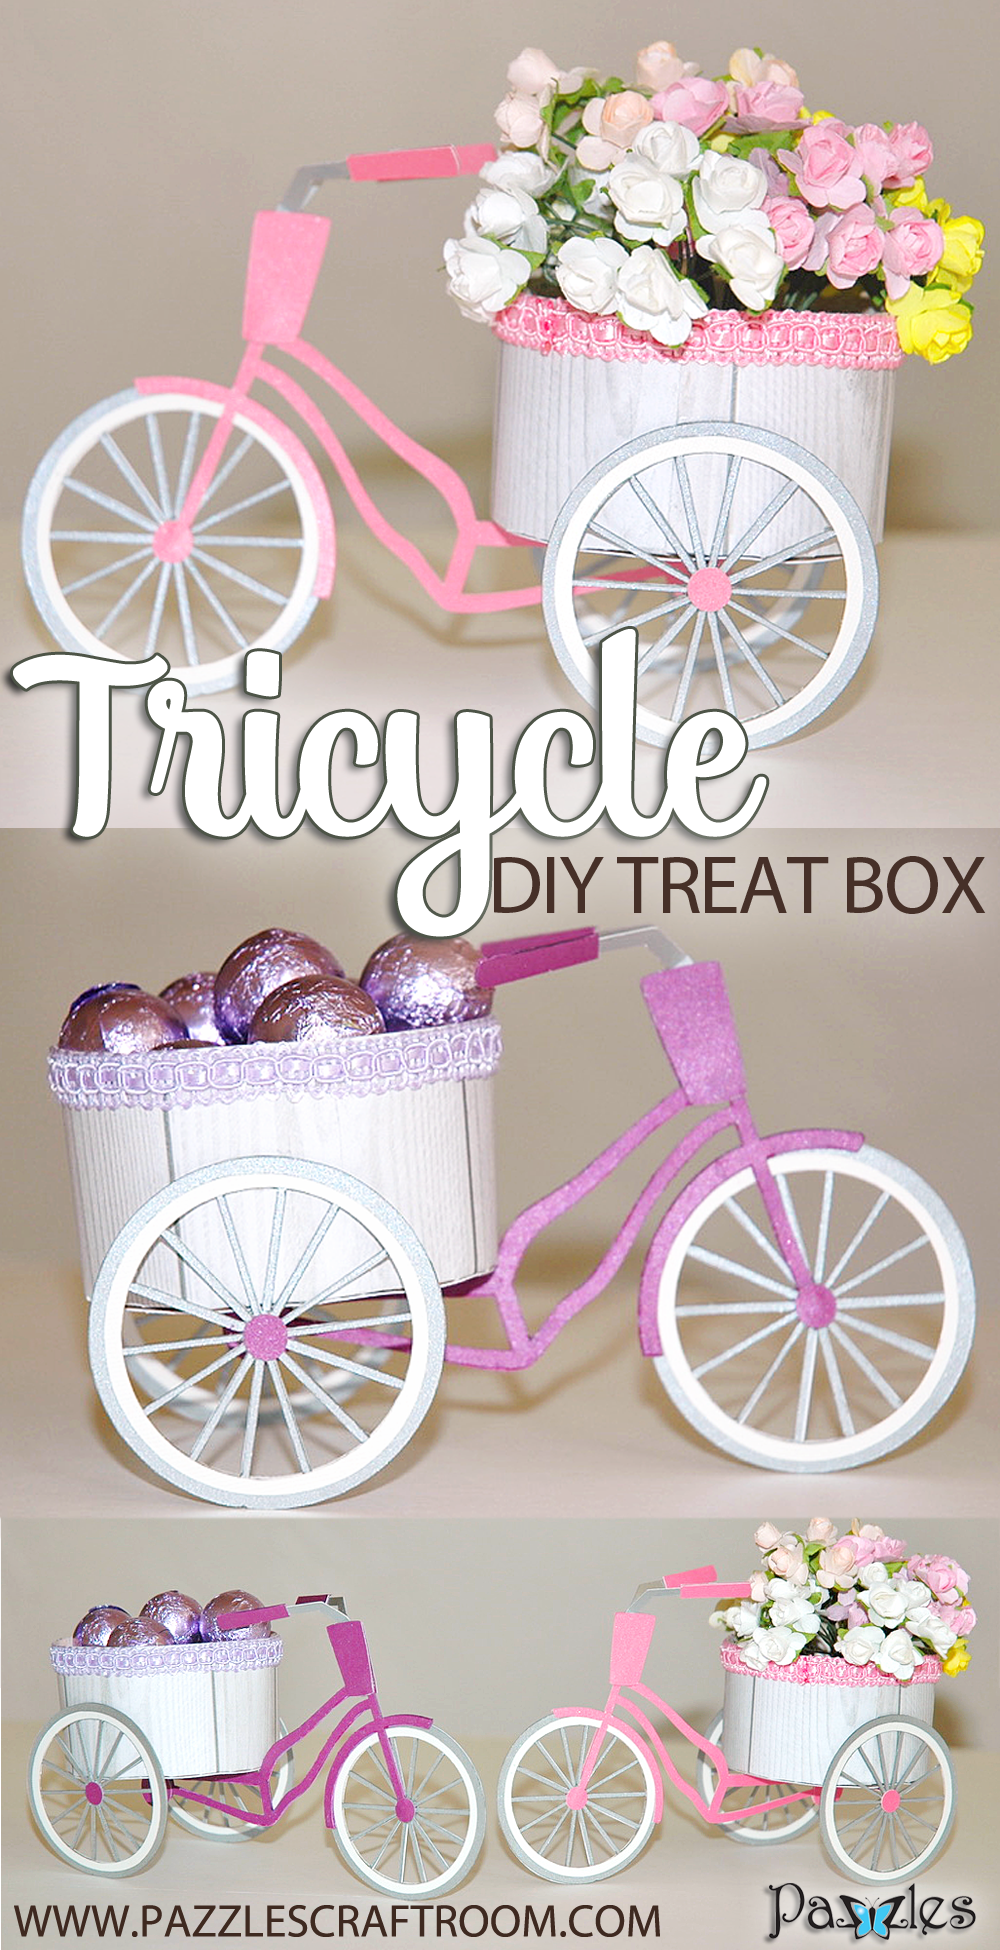 Pazzles DIY Craft Tricycle Treat Box by Judy Hanson